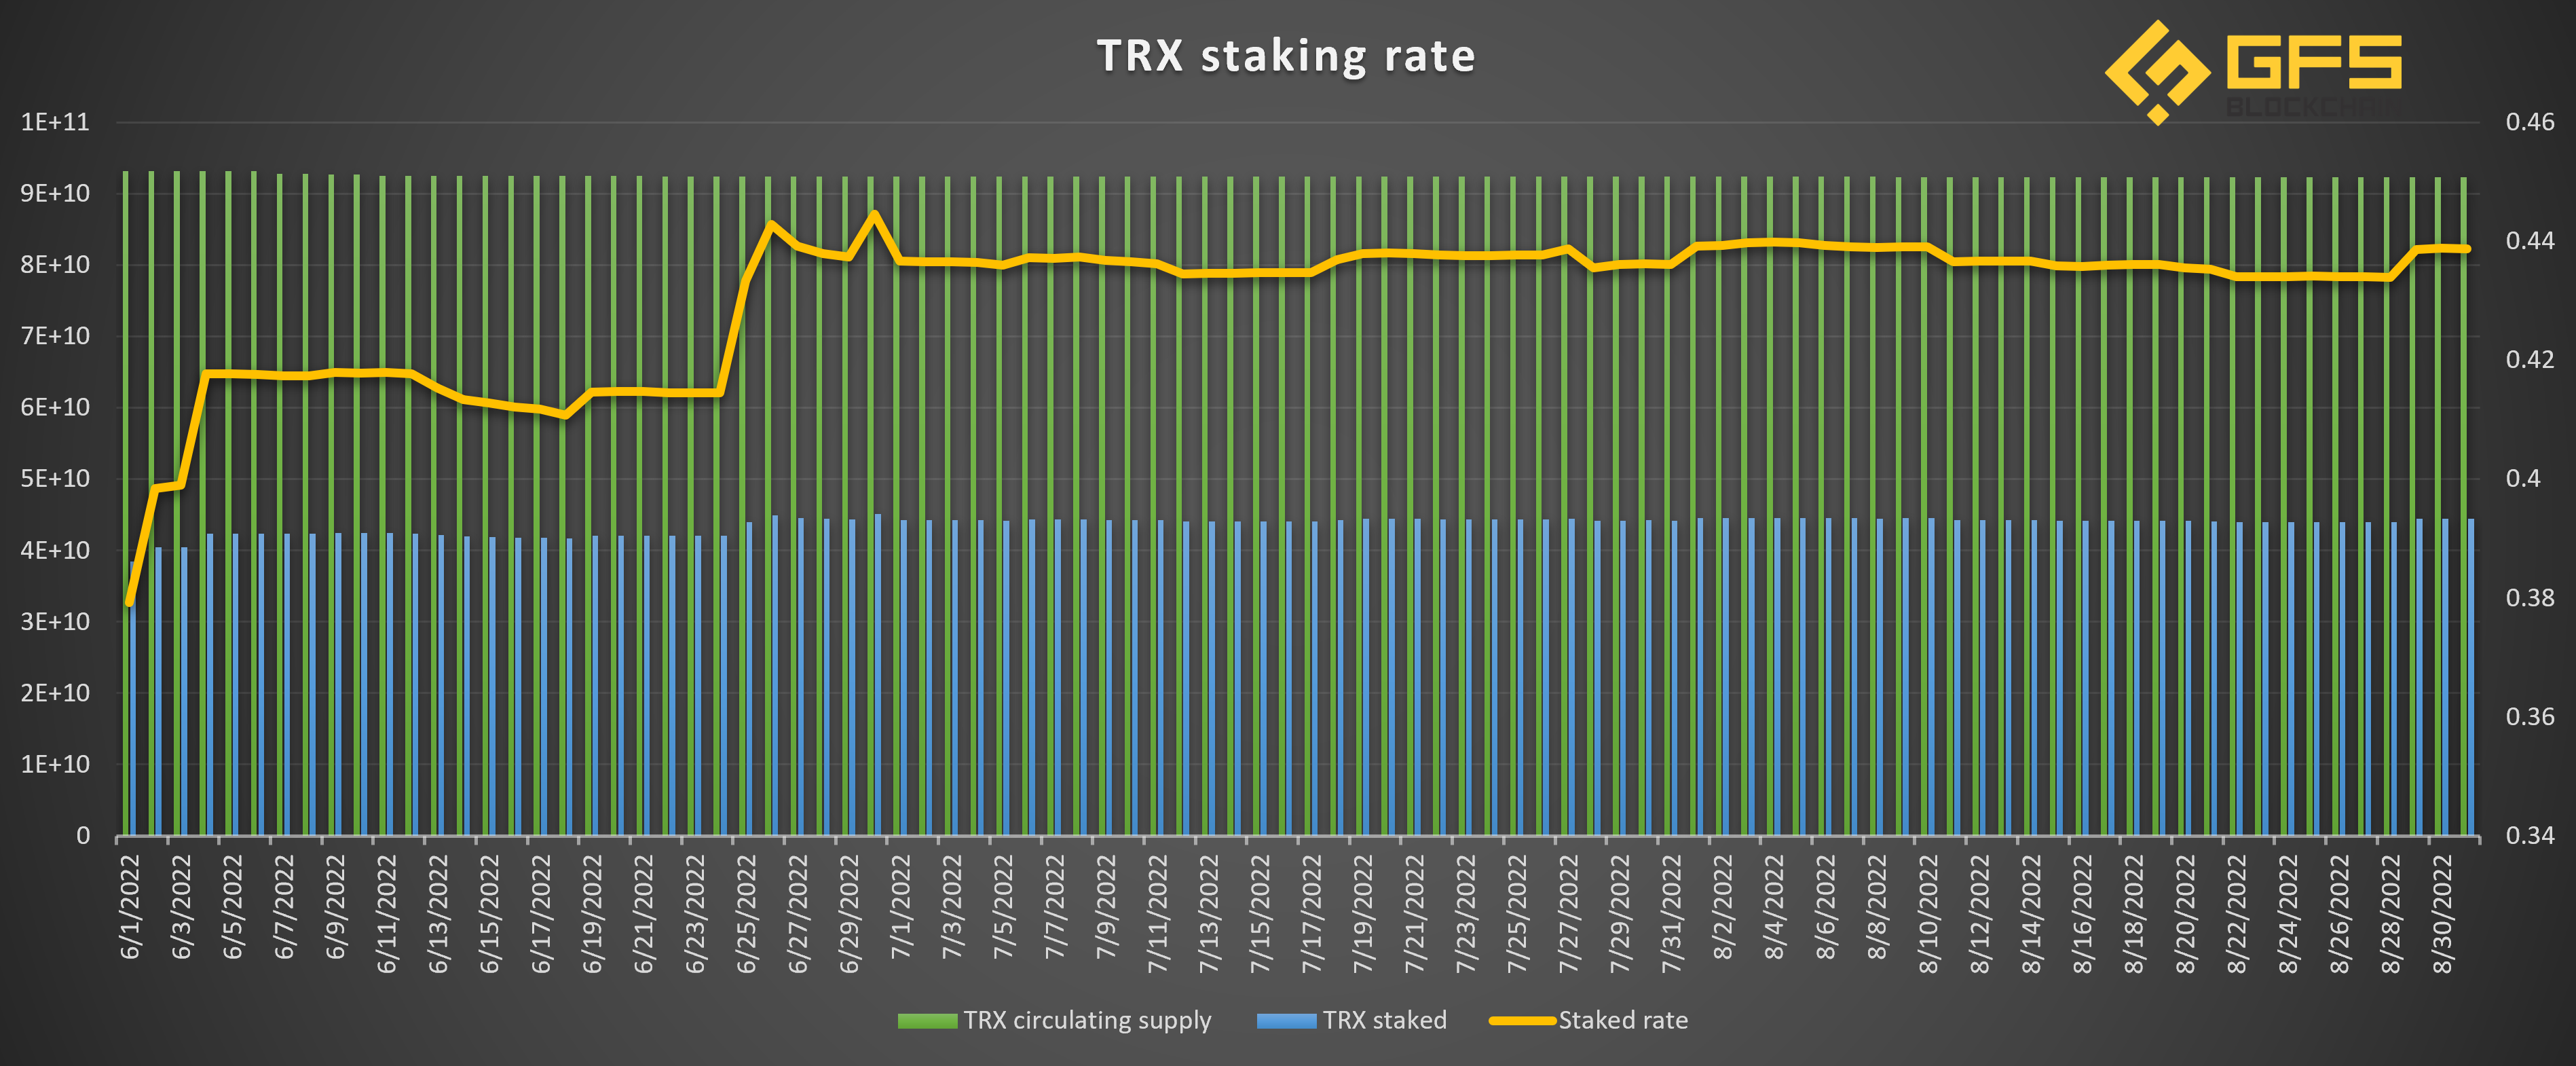 TRX staking rate